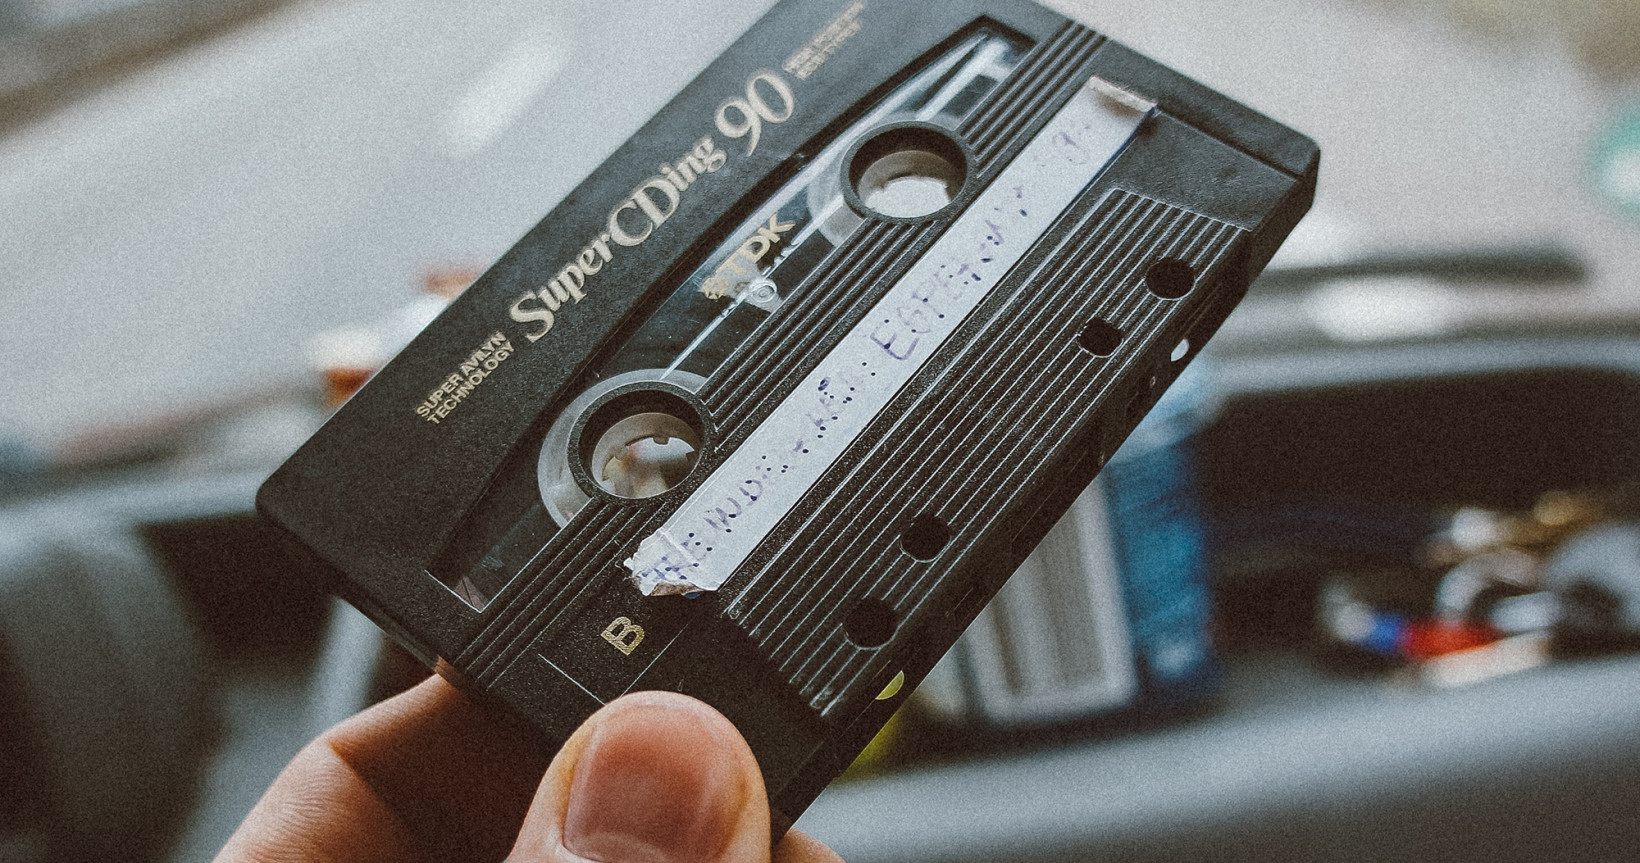 Here's why cassette tape sales doubled during the pandemic